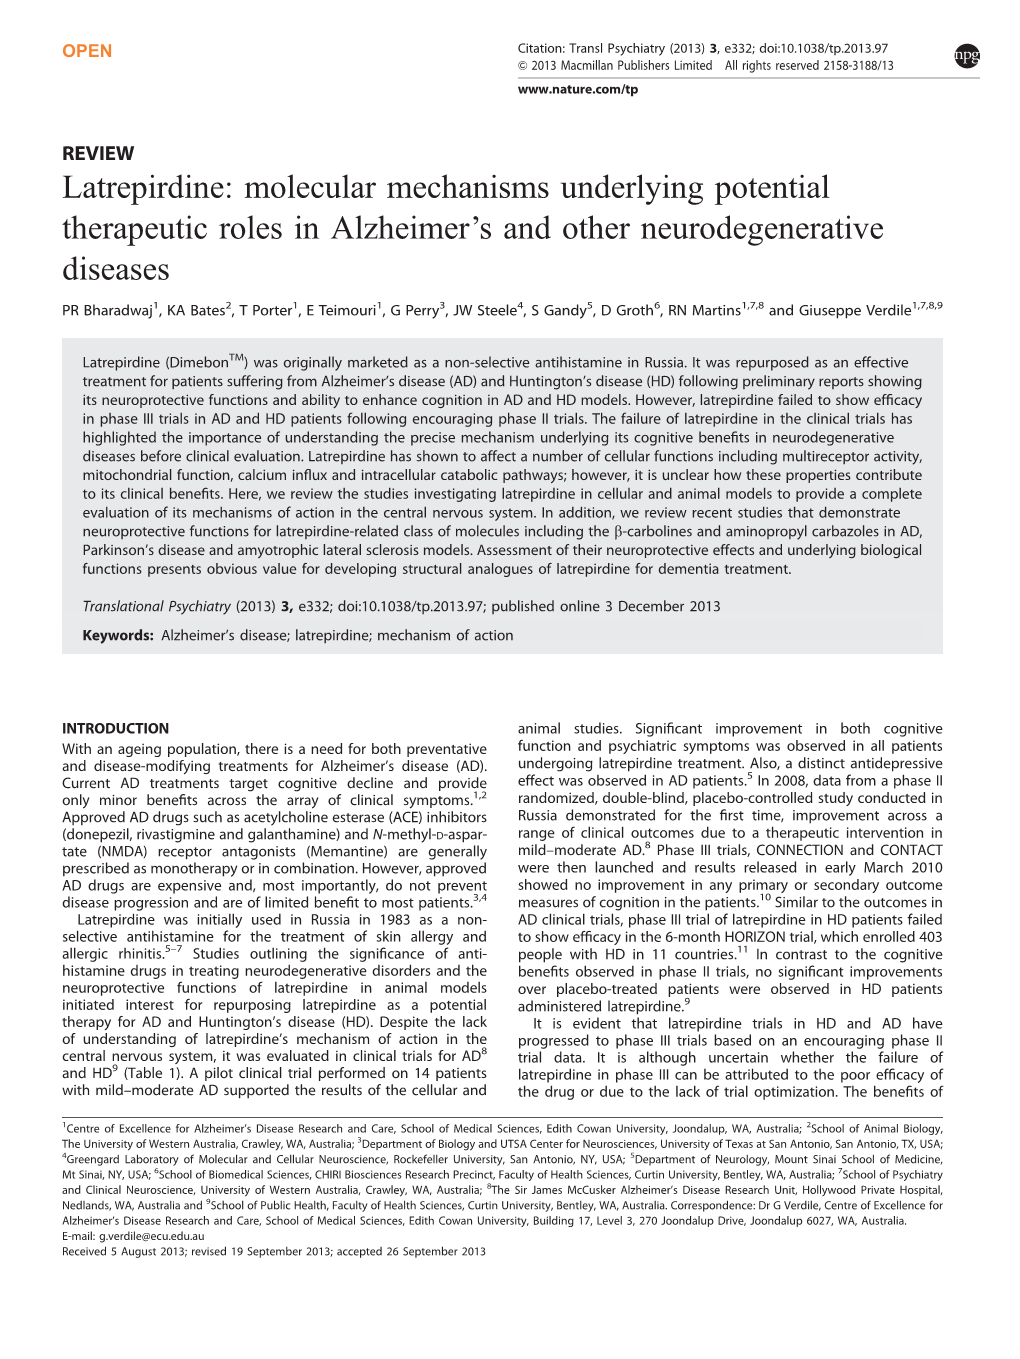 Latrepirdine: Molecular Mechanisms Underlying Potential Therapeutic Roles in Alzheimer’S and Other Neurodegenerative Diseases